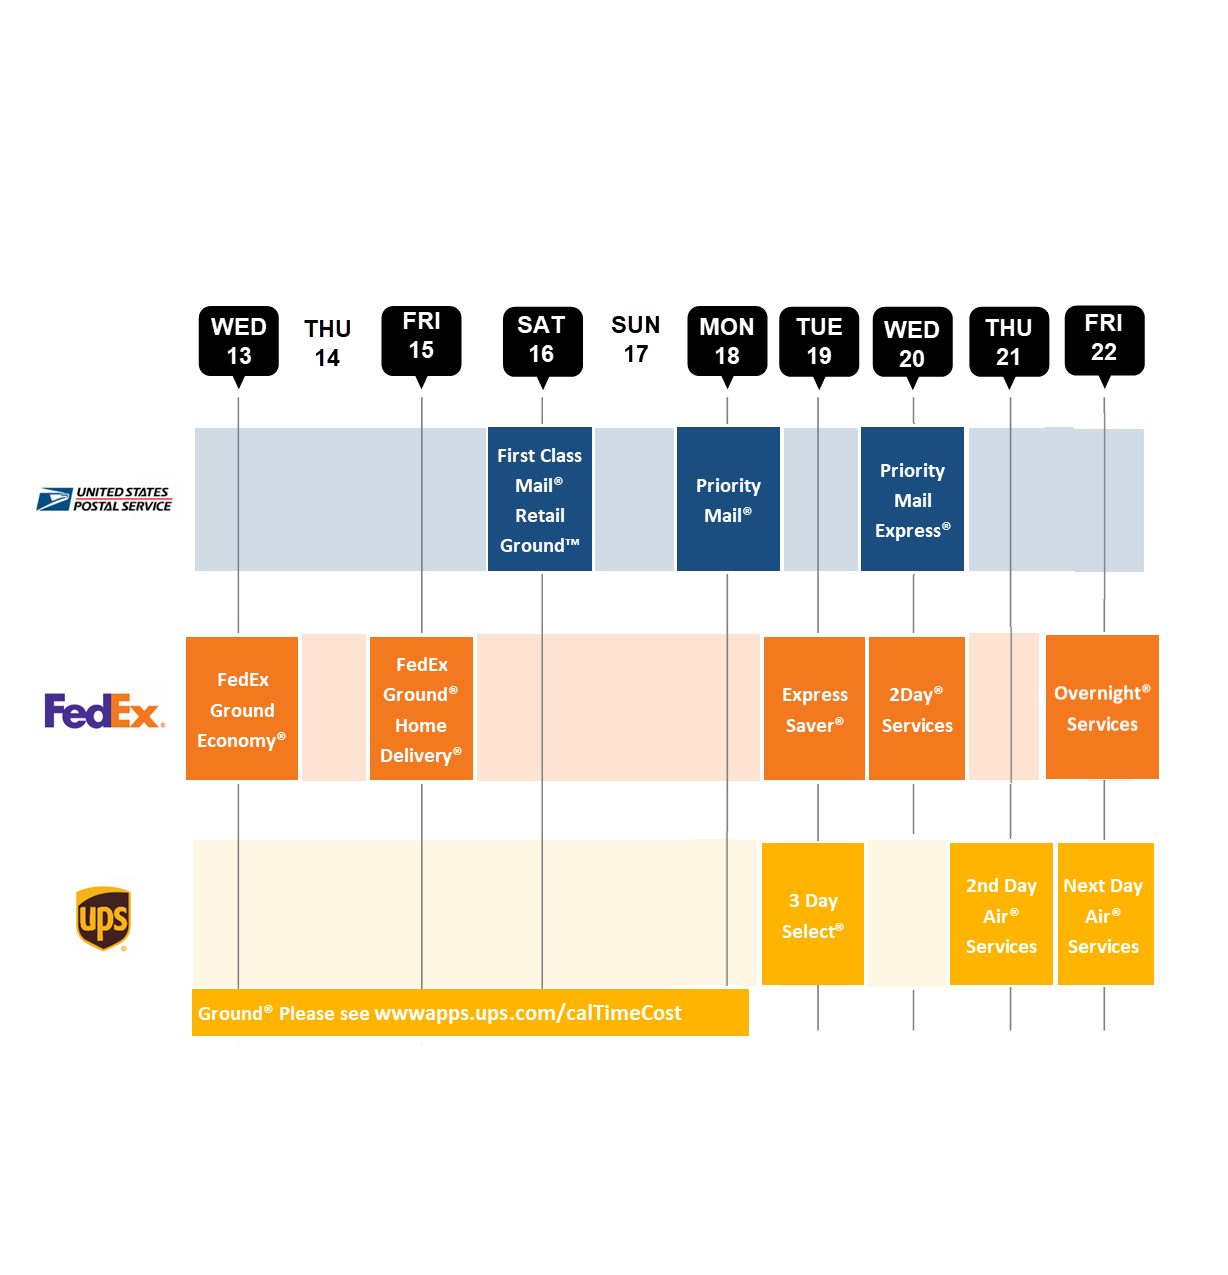 graphic of fedex, ups, and usps services and their corresponding holiday cutoff dates